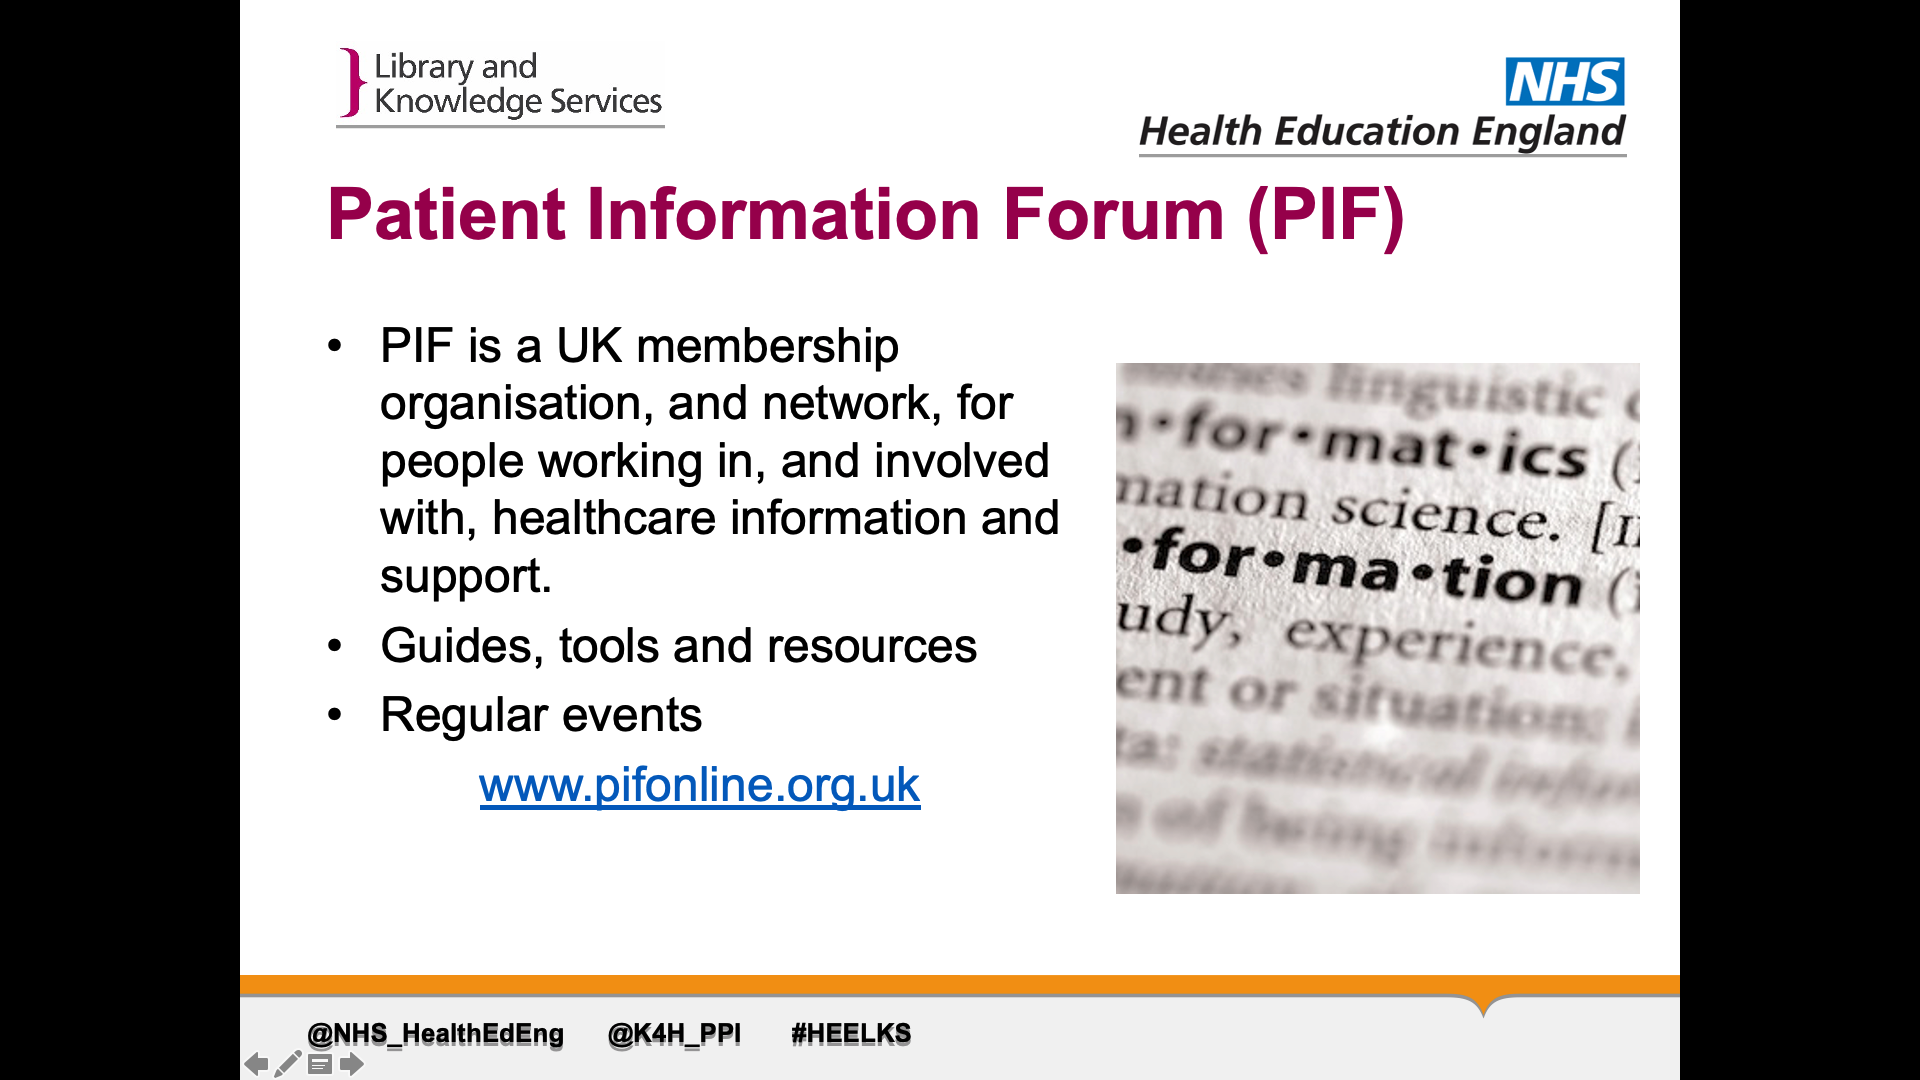 Title: Patient Information Forum (PIF). Text on page: 1. PIF is a UK membership organisation, and network, for people working in, and involved with, healthcare information and support. 2. Guides, tools and resources. 3. Regular events